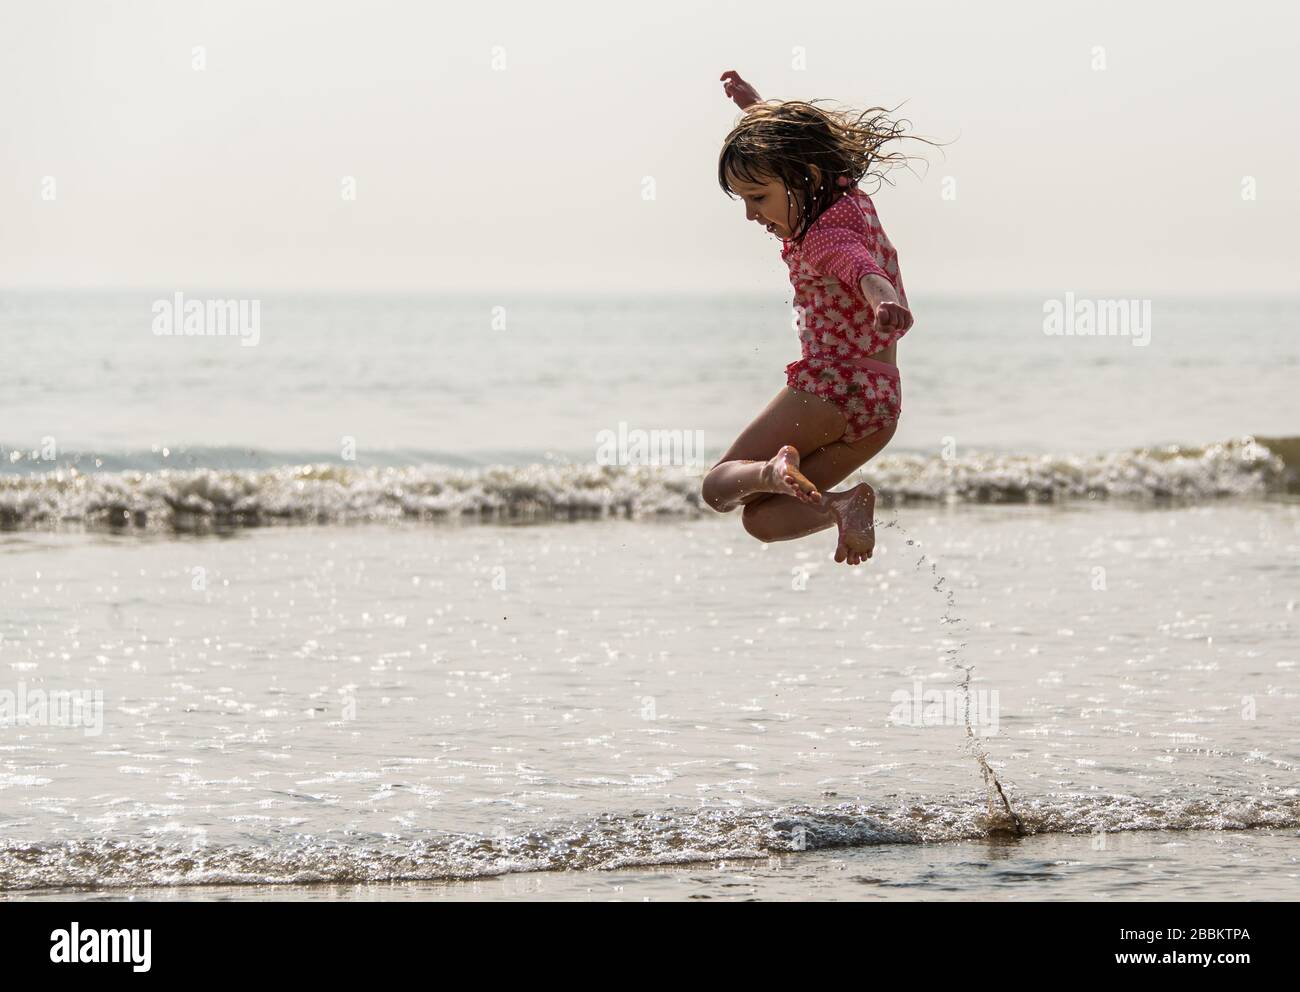 Young girl jumping in the waves at the seaside, splashing and having fun. Camber sands, England Stock Photo